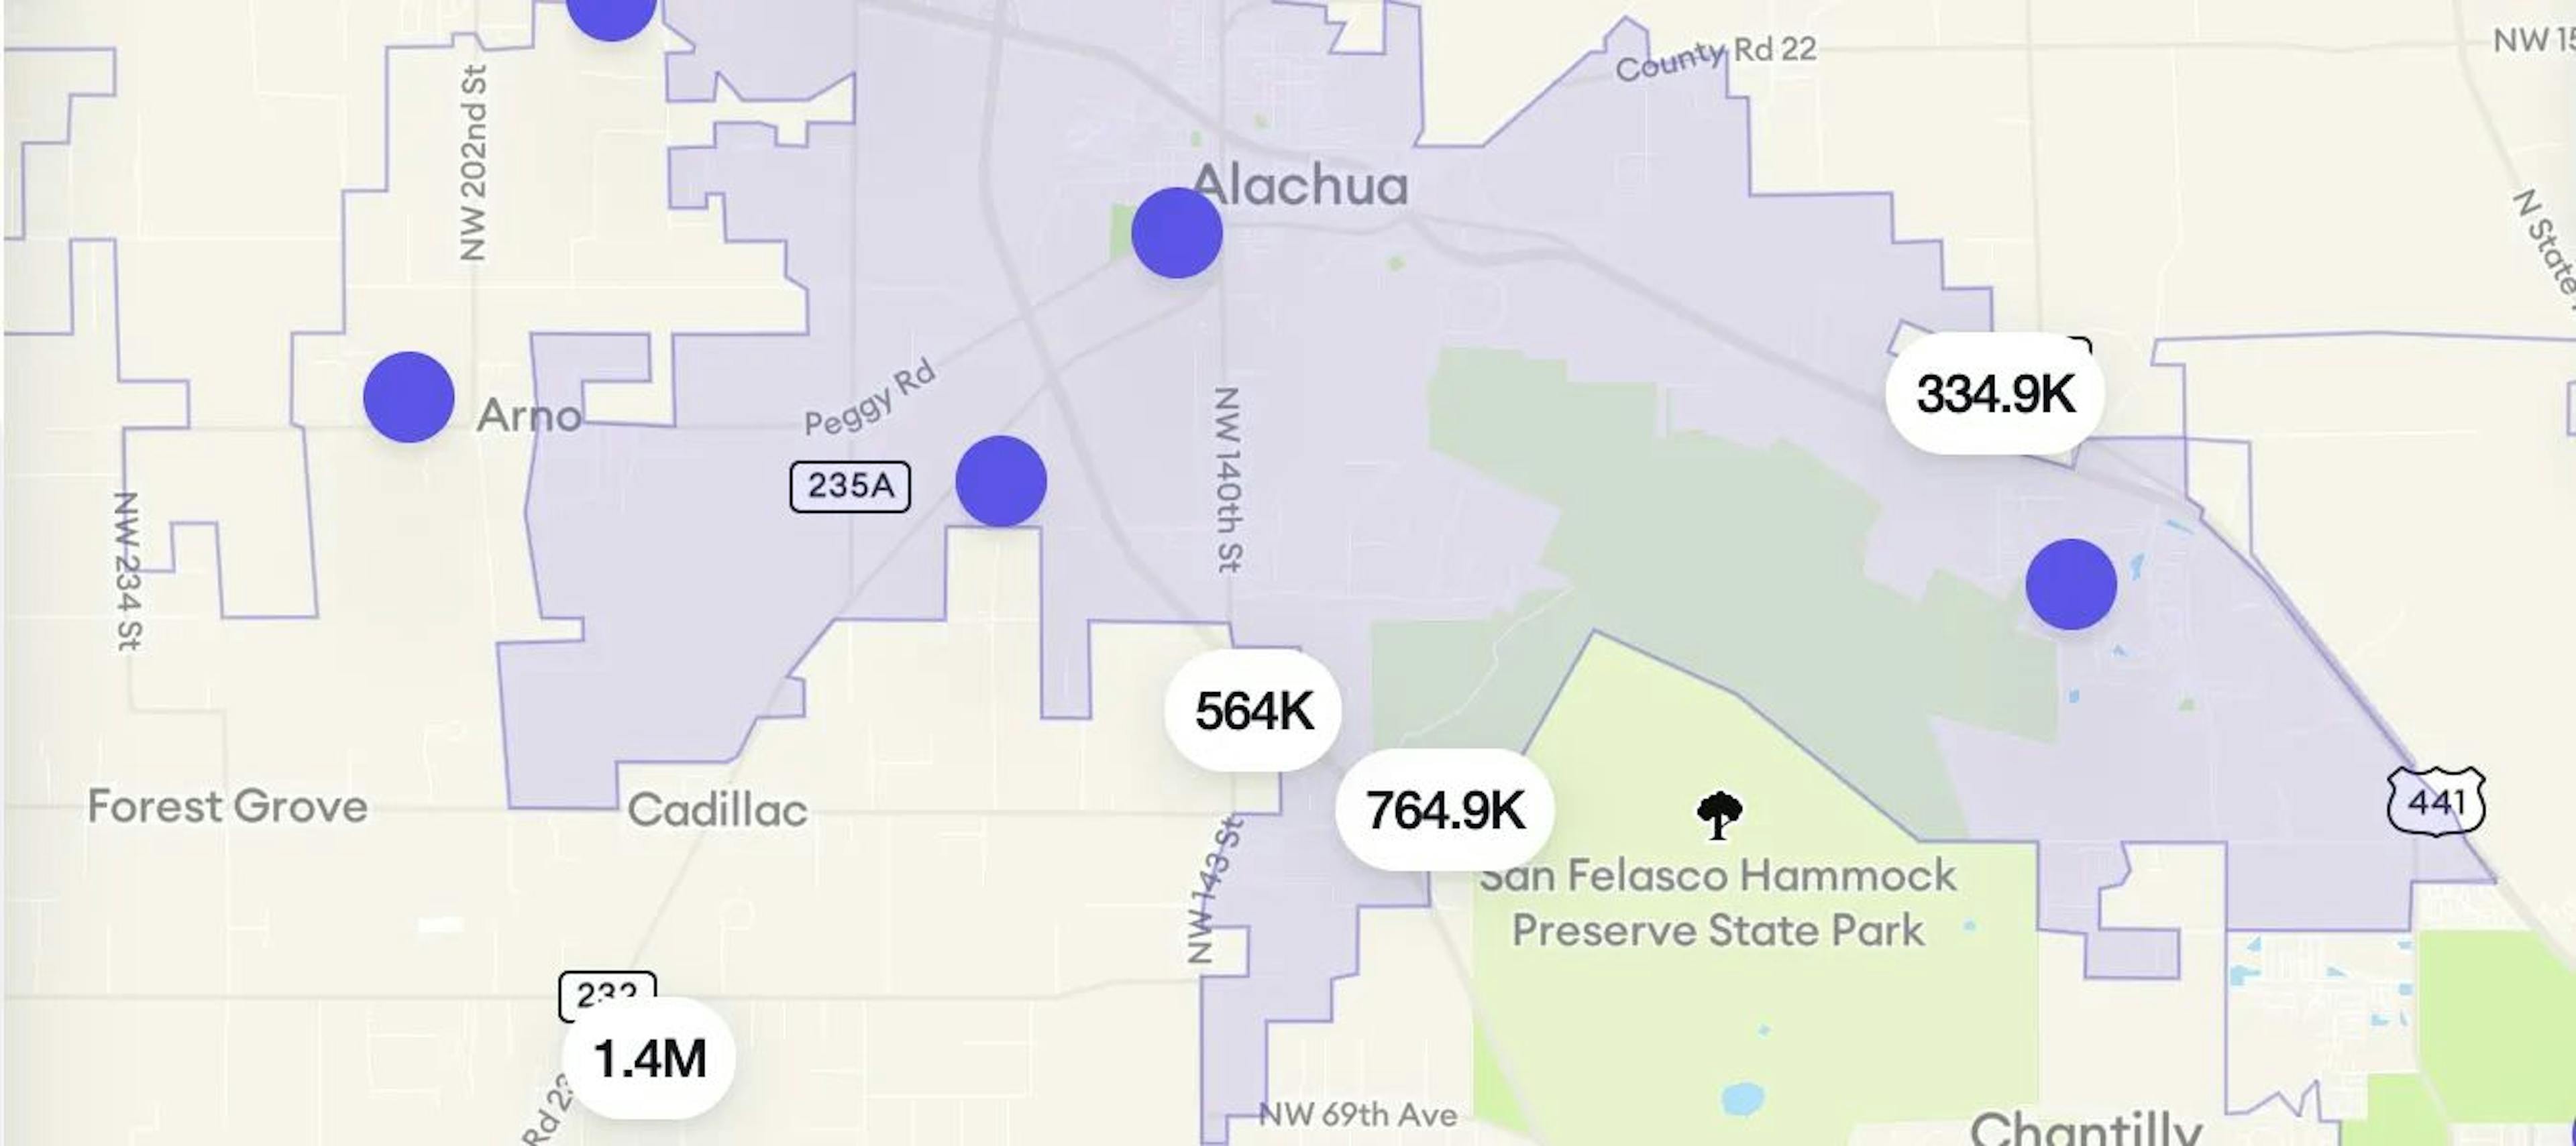 Fetch allows us to load data for the map.